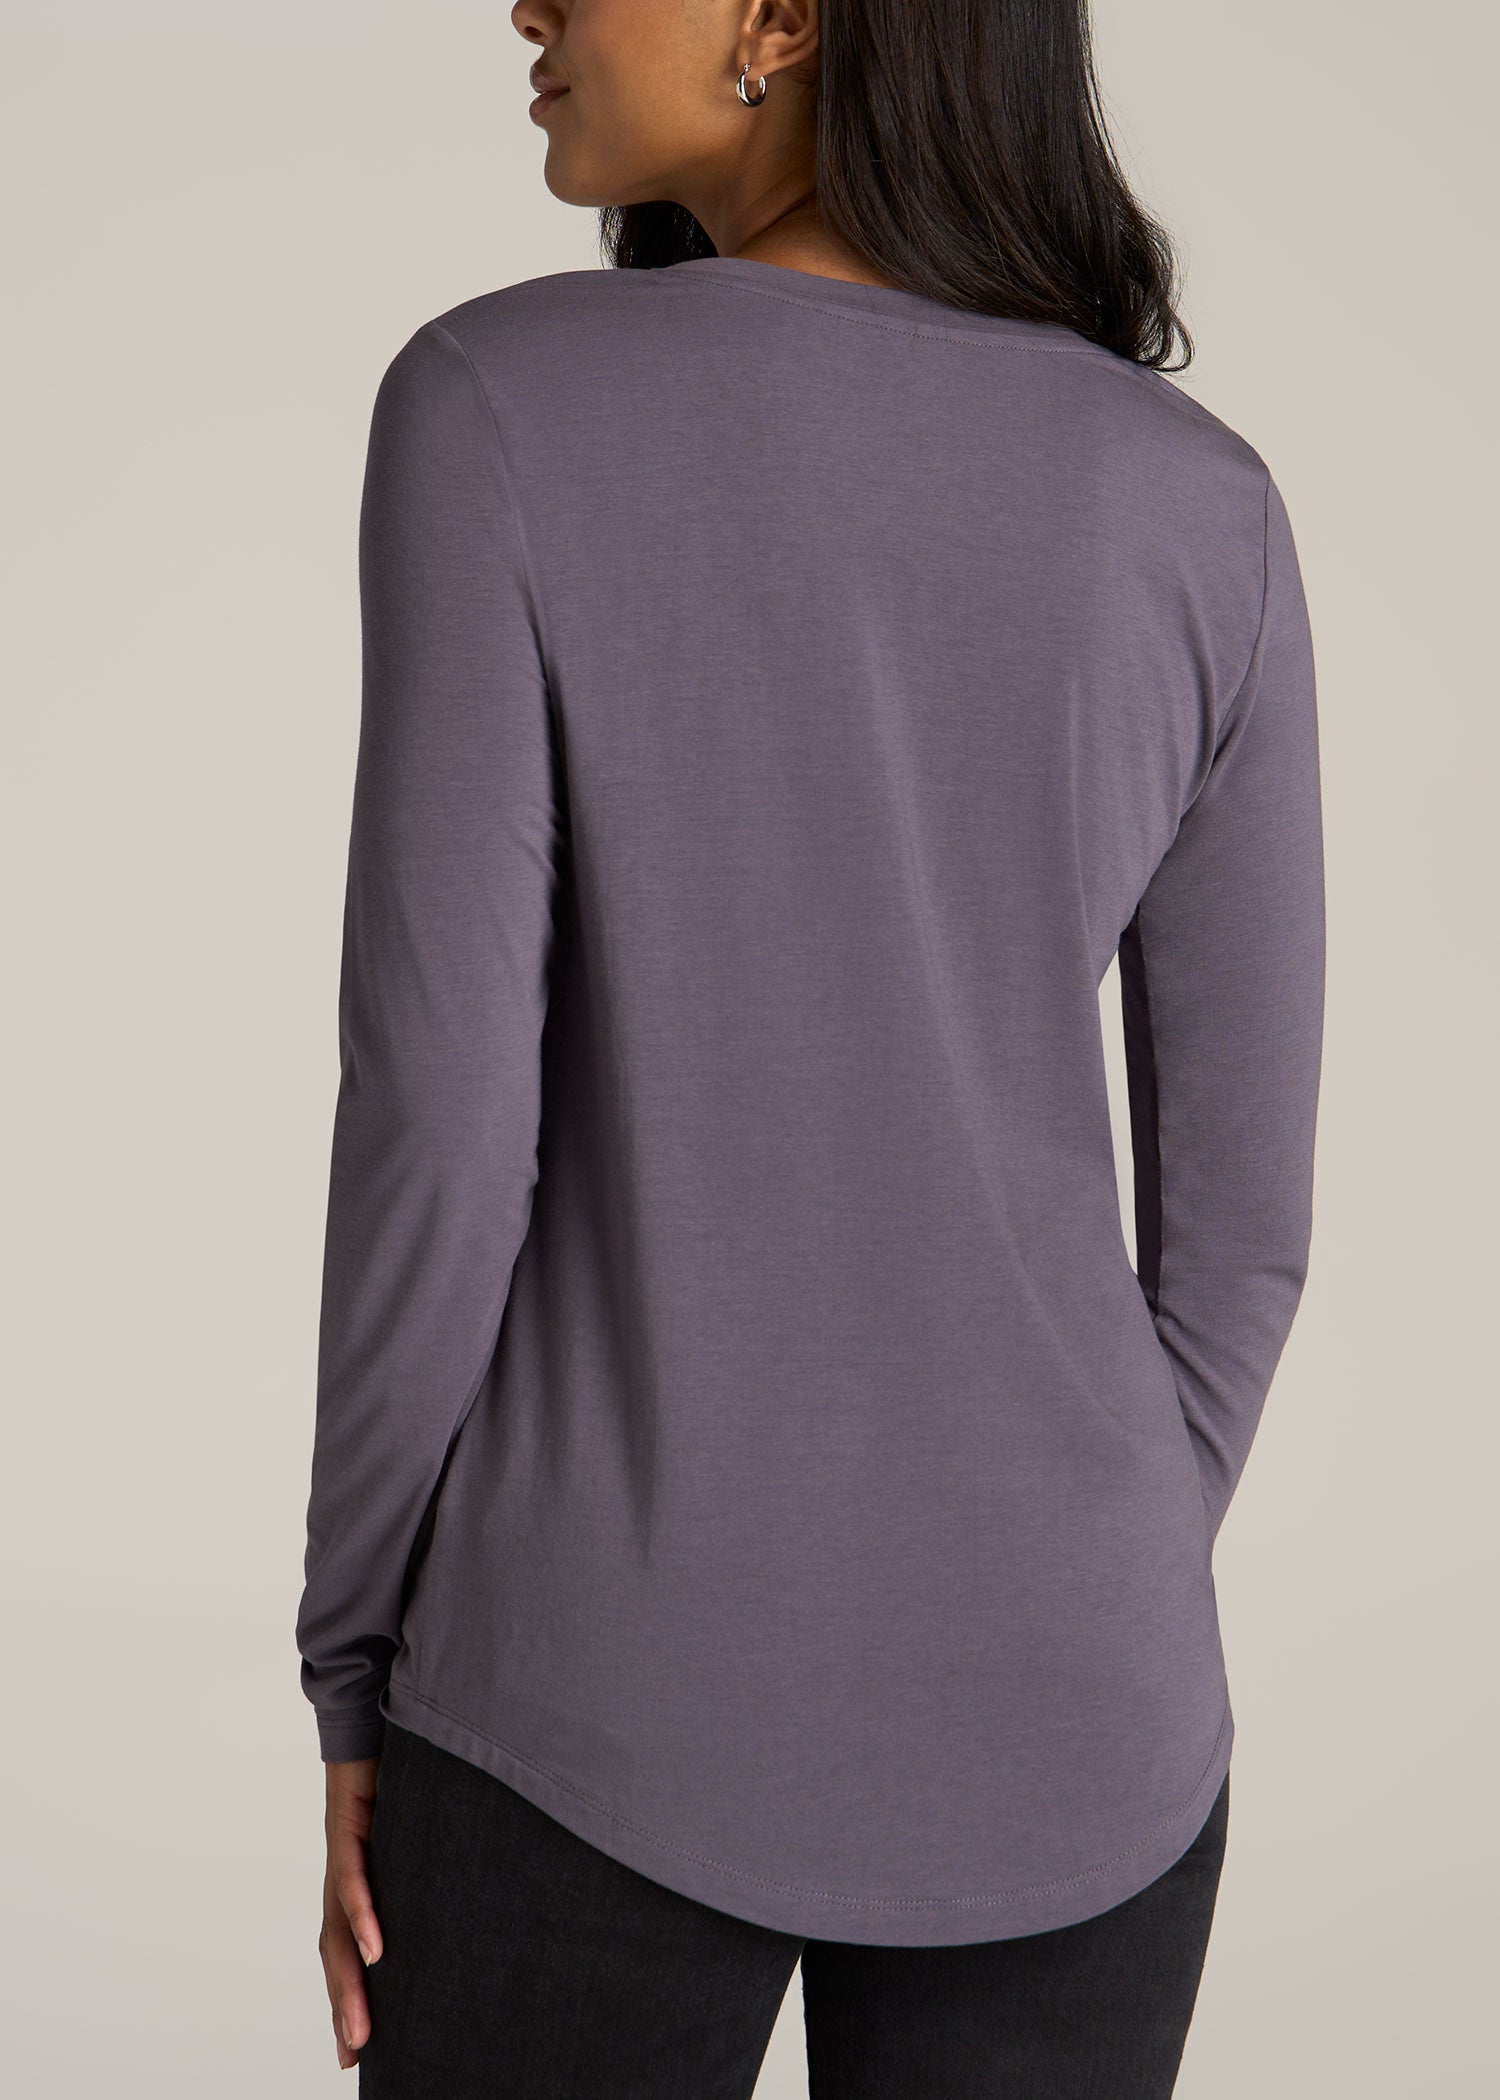 American-Tall-Women-Long-sleeve-scoop-v-neck-tee-charcoal-back